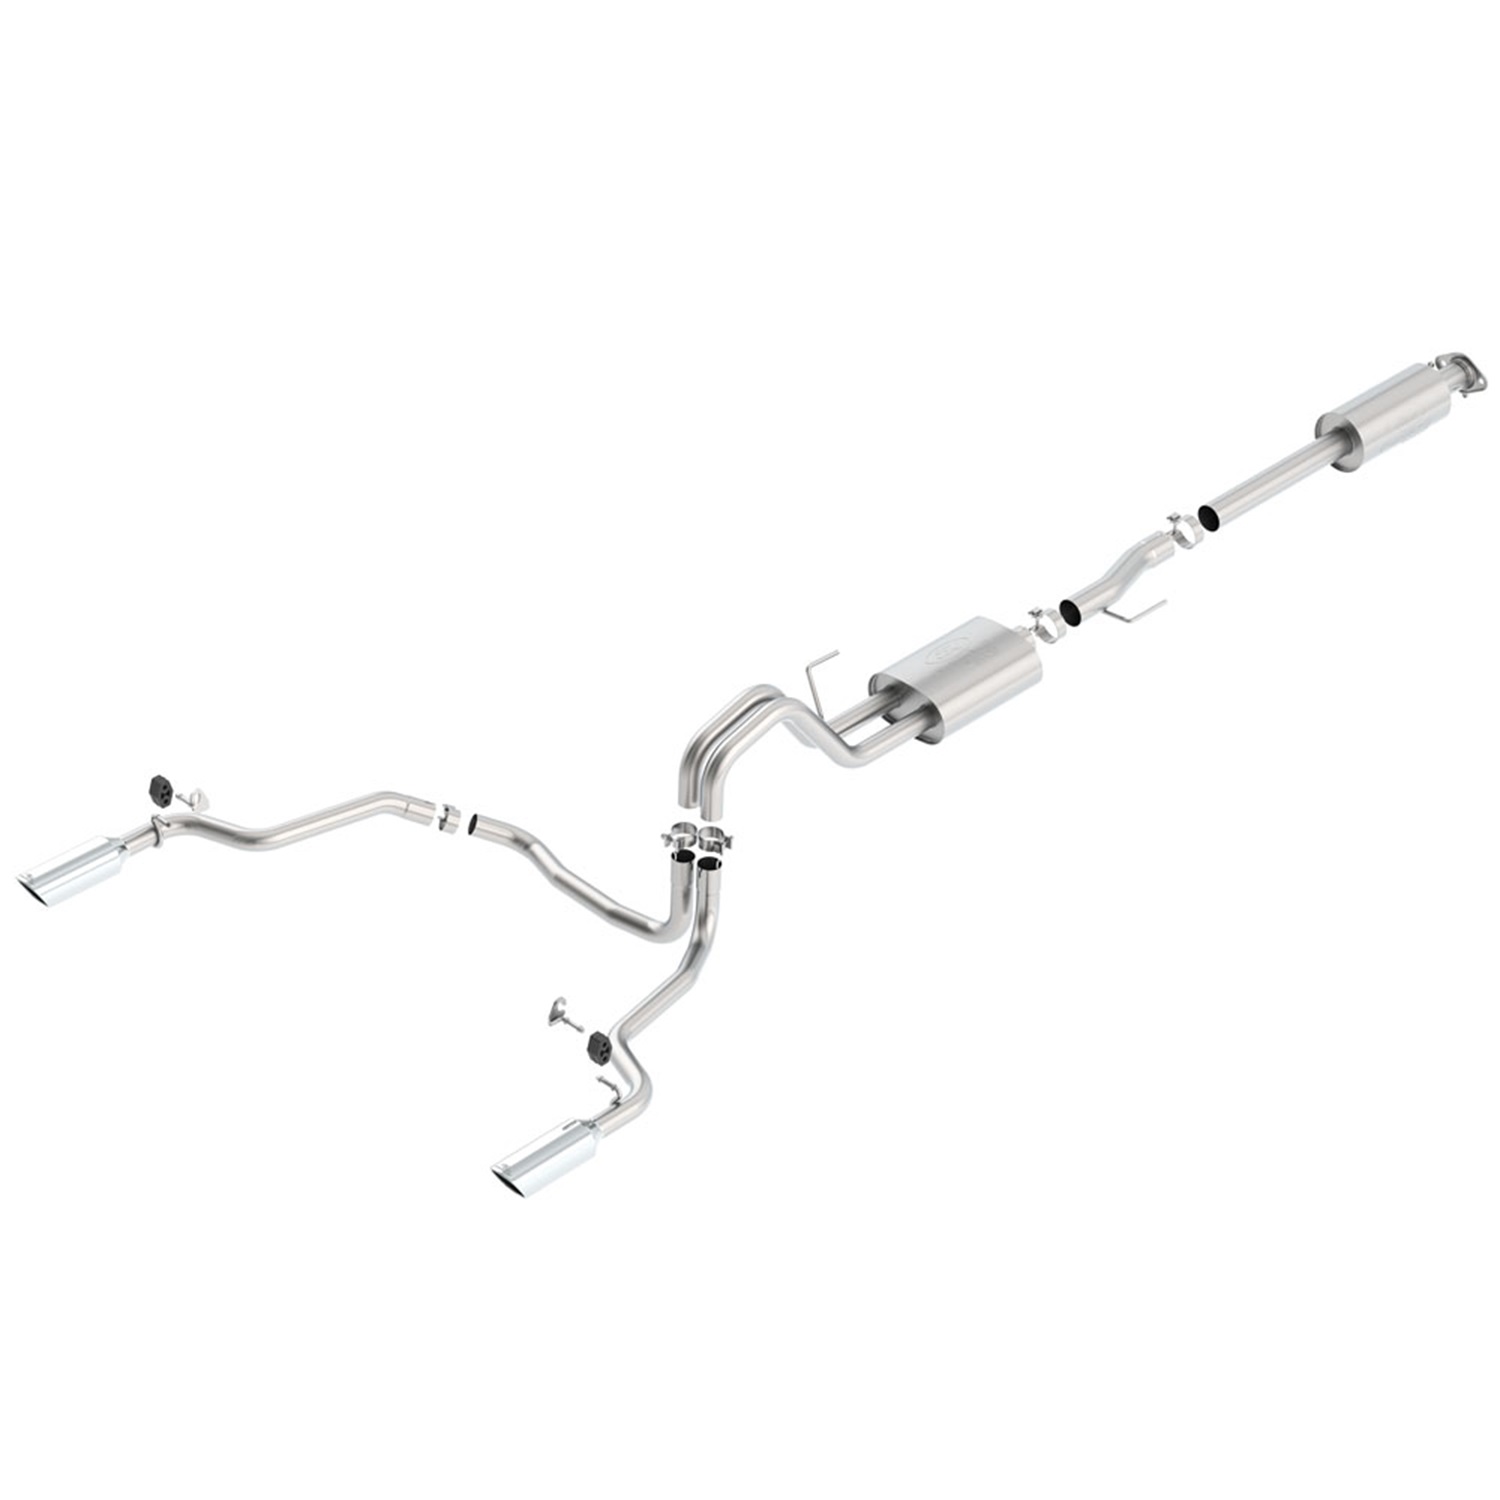 Ford Racing Ford Racing M-5200-F1527DTC Cat-Back Exhaust System Fits 15 F-150